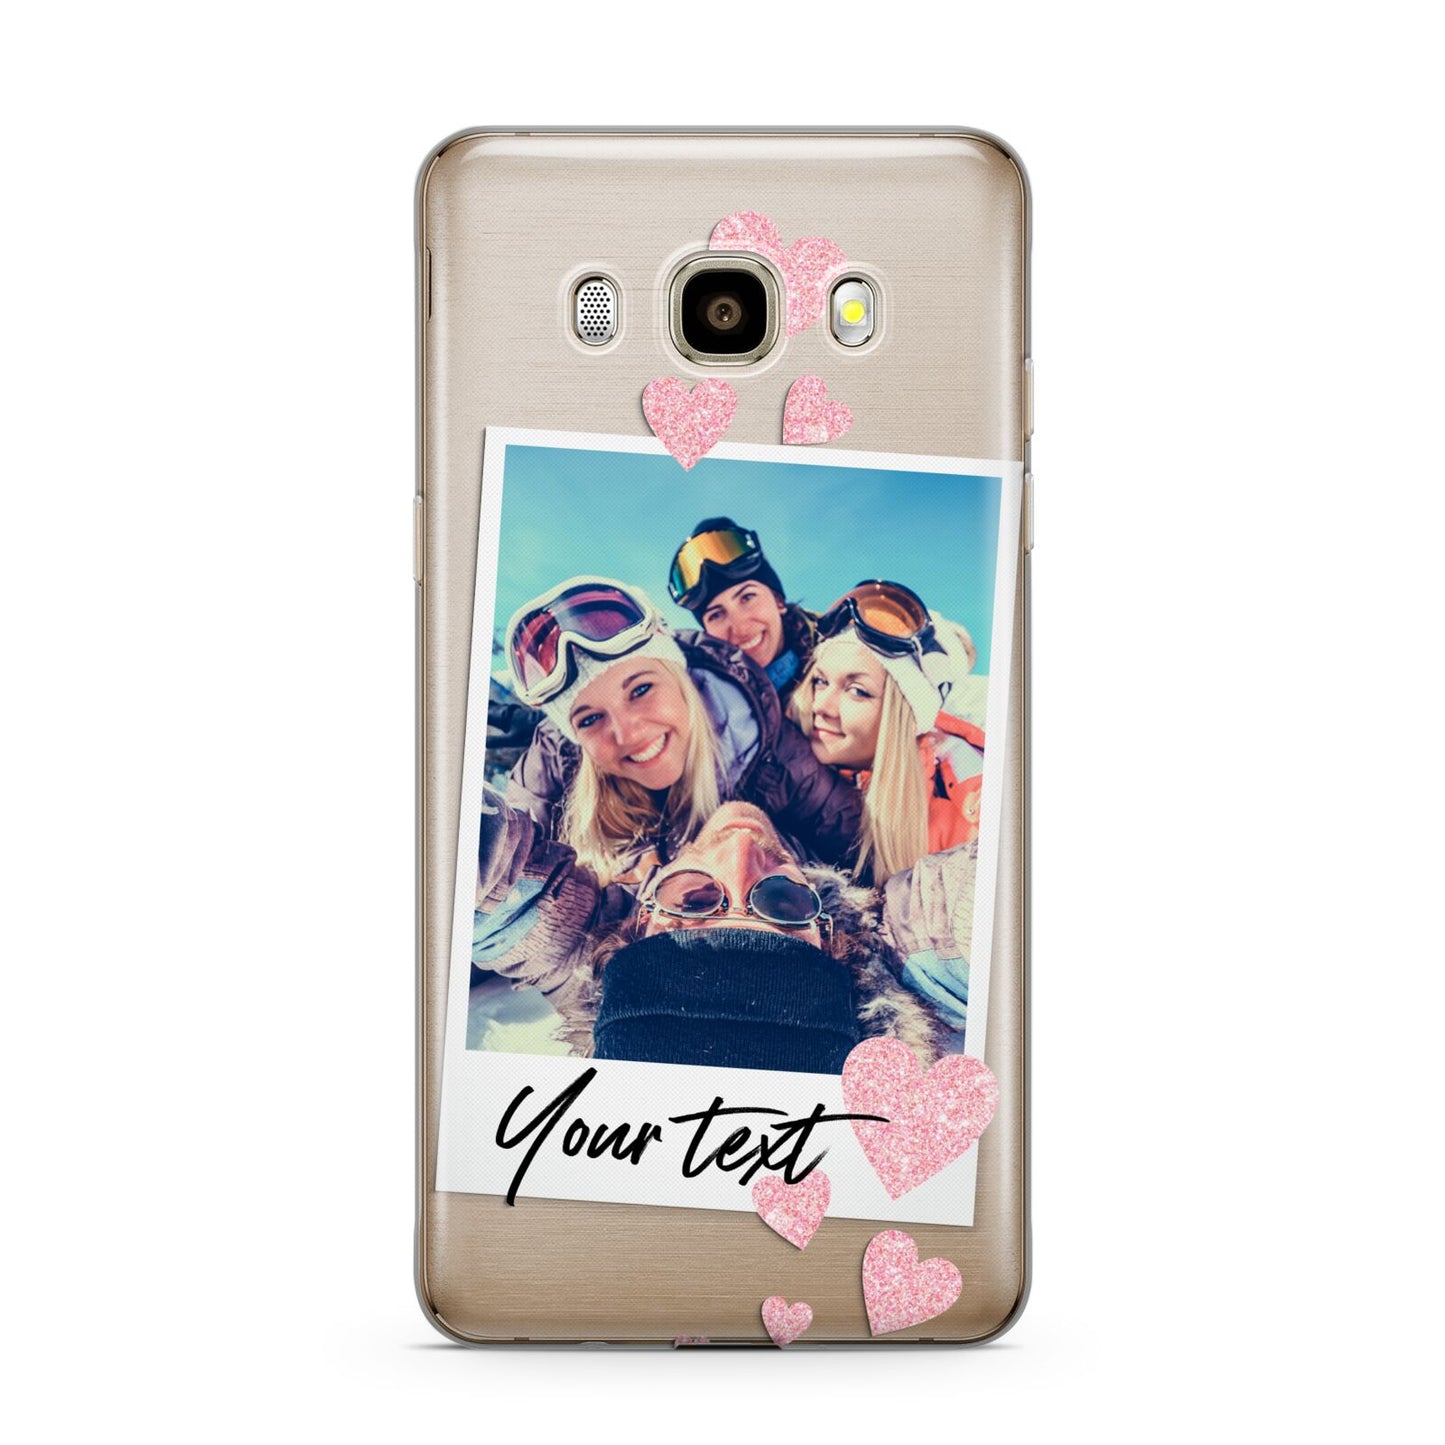 Photo with Text Samsung Galaxy J7 2016 Case on gold phone